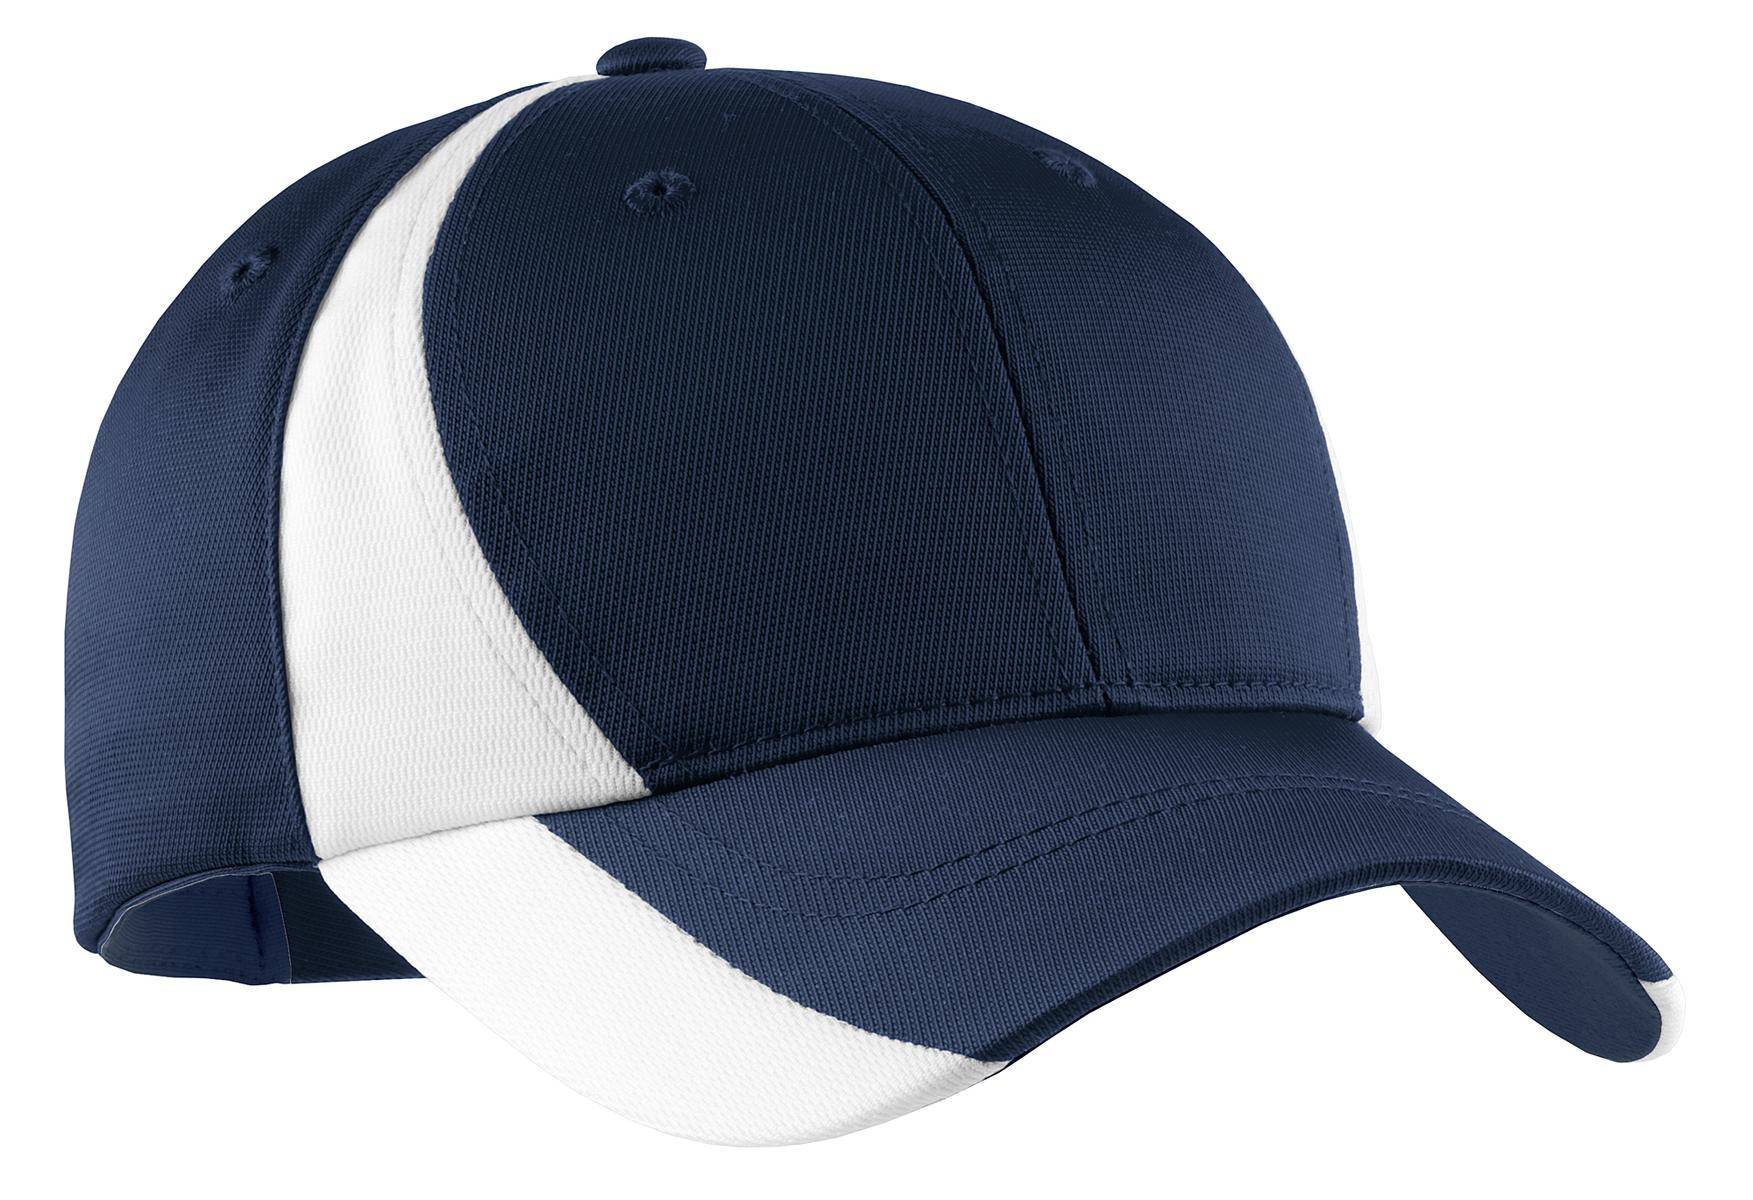 Selected Color is True Navy/White